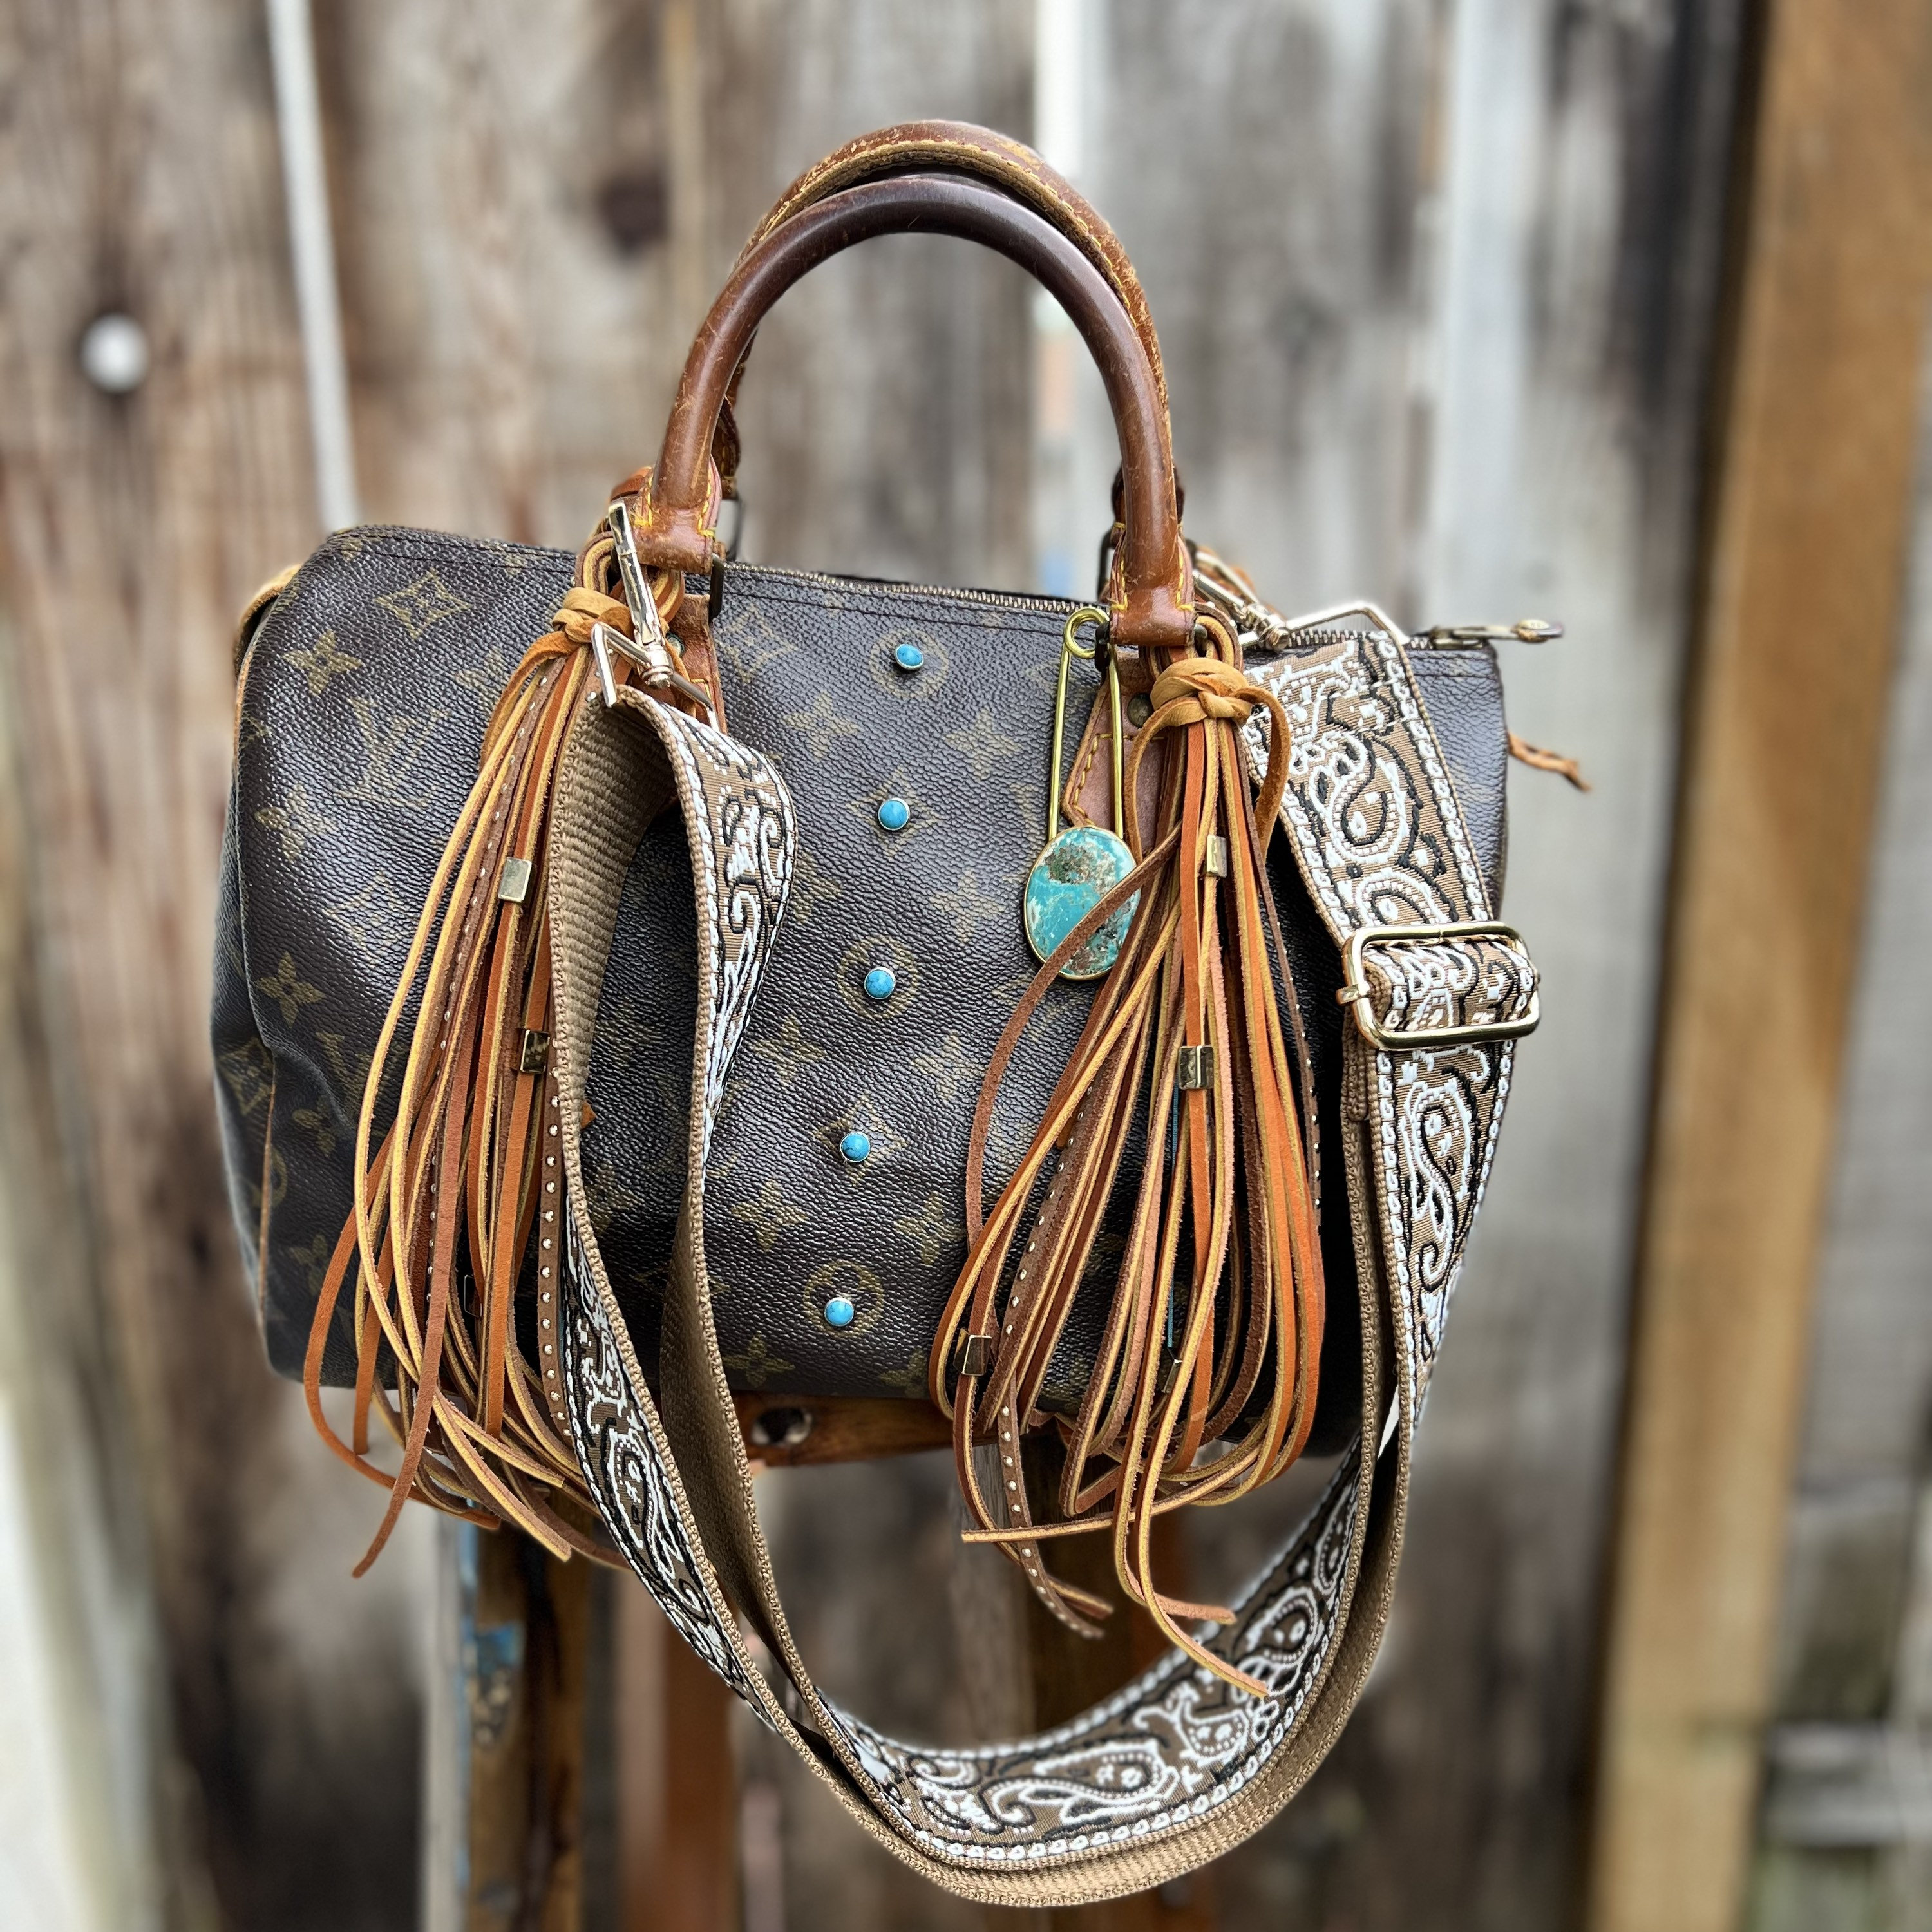 Vintage authentic reworked Louis Vuitton 1980’s Speedy 30 with turquoise  and leather fringe